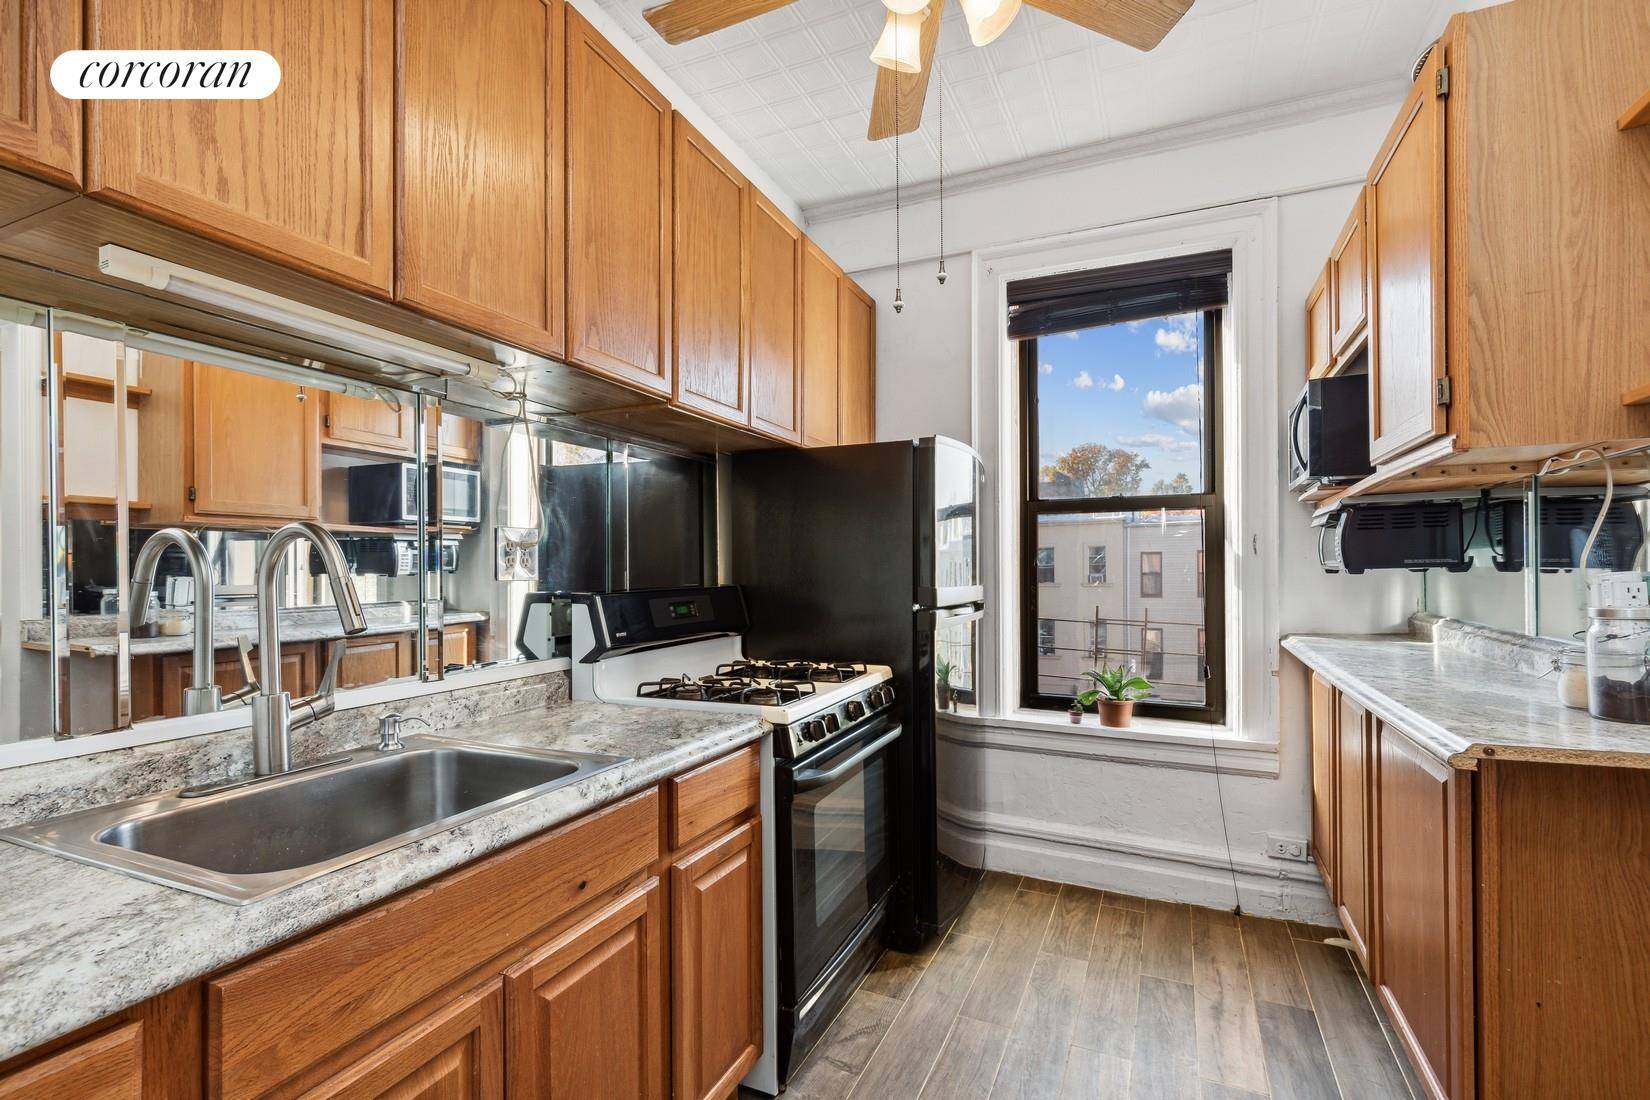 Fantastic opportunity to own a legal two family 20' brownstone with exquisite original details and great natural light.